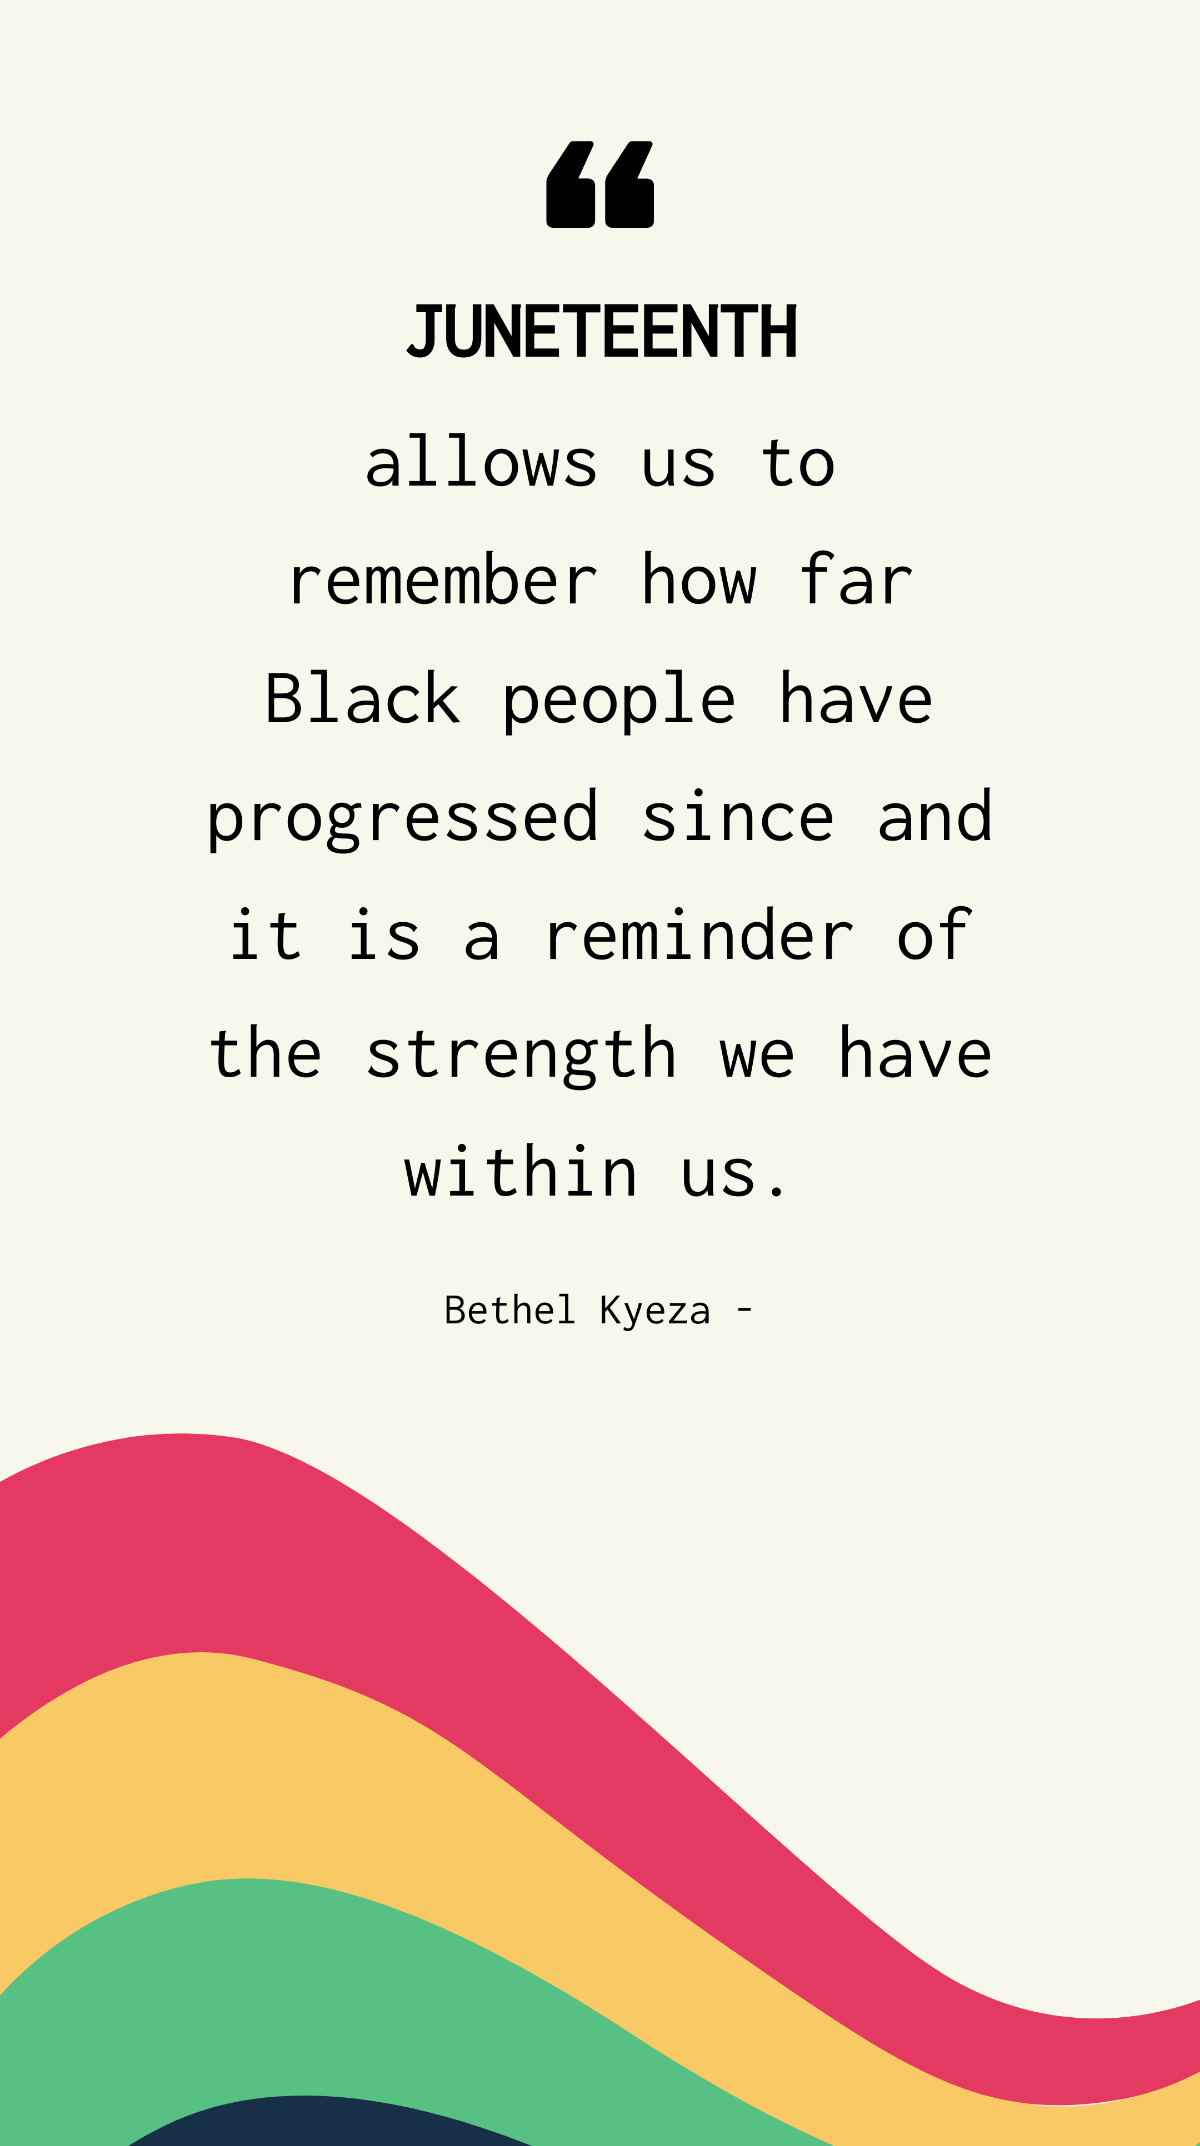 Bethel Kyeza - Juneteenth allows us to remember how far Black people have progressed since and it is a reminder of the strength we have within us. Template